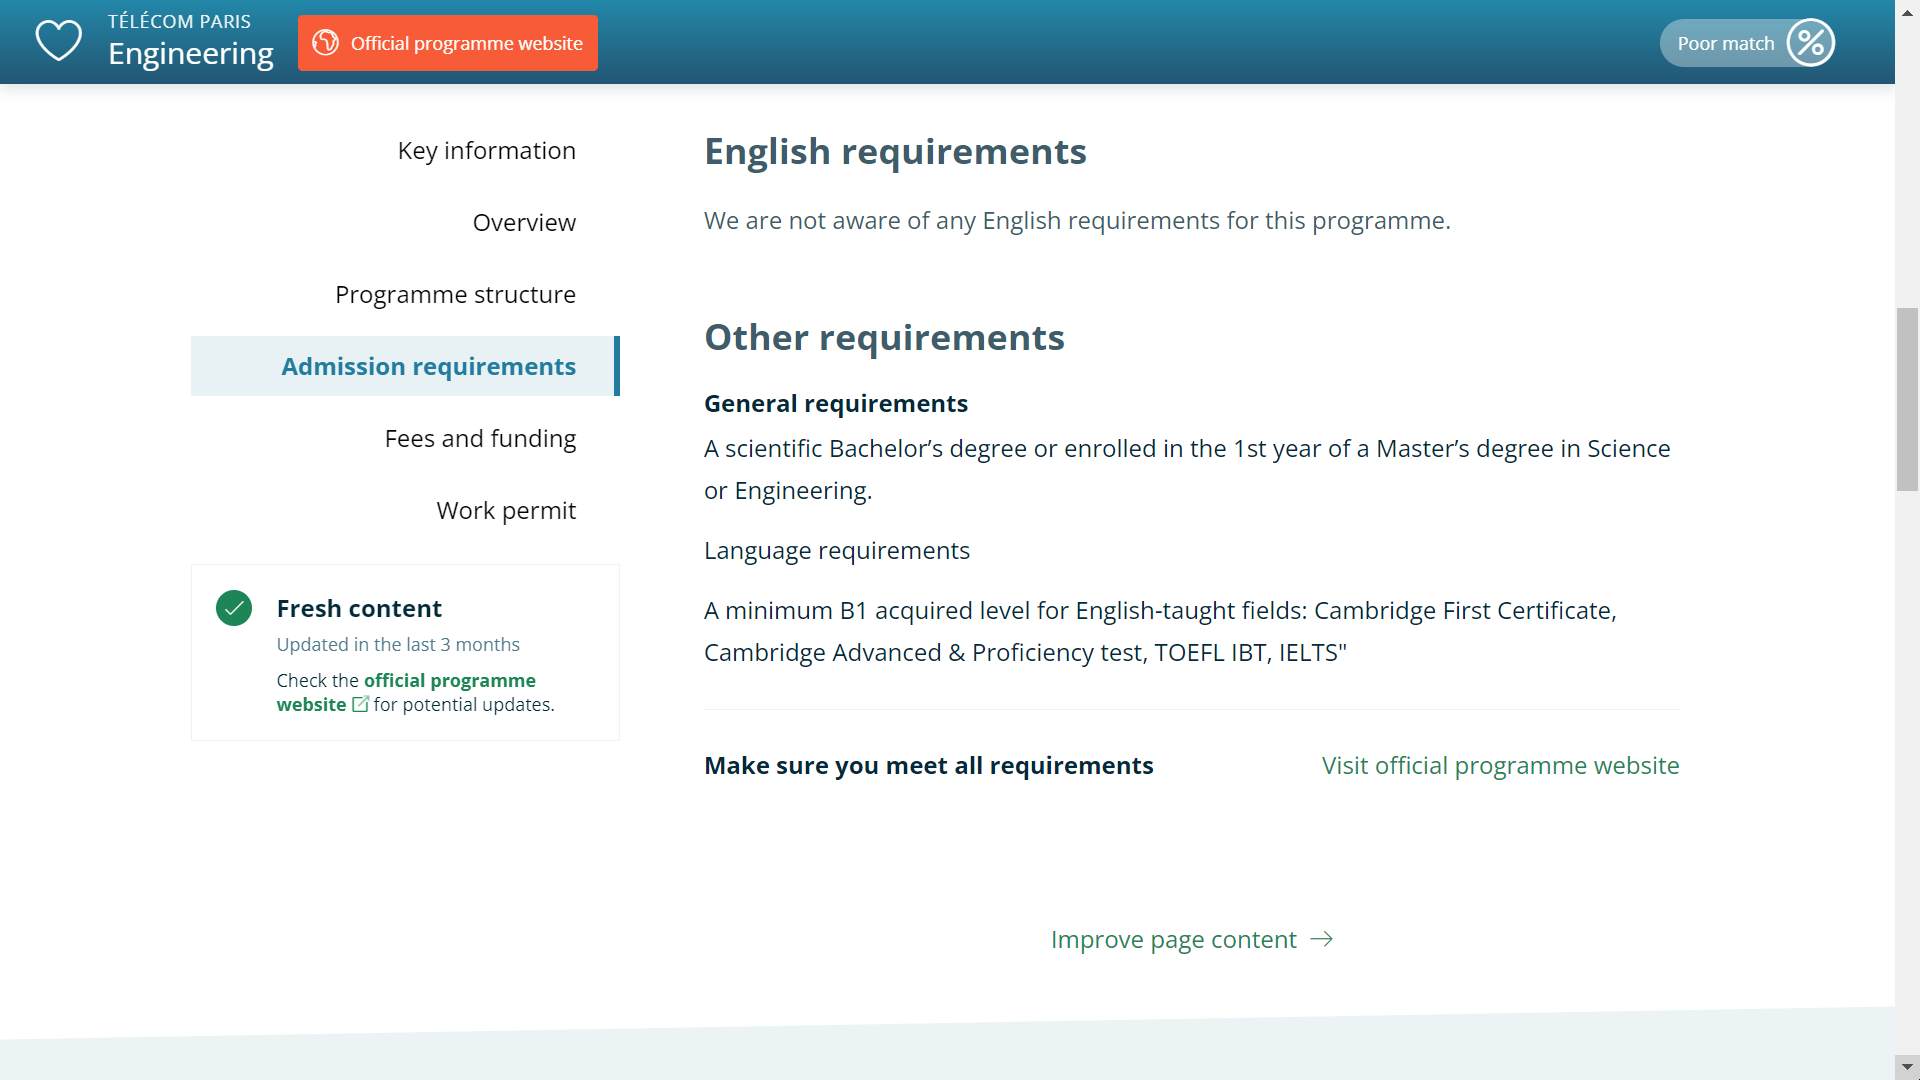 Example of English language requirements at engineering school in France